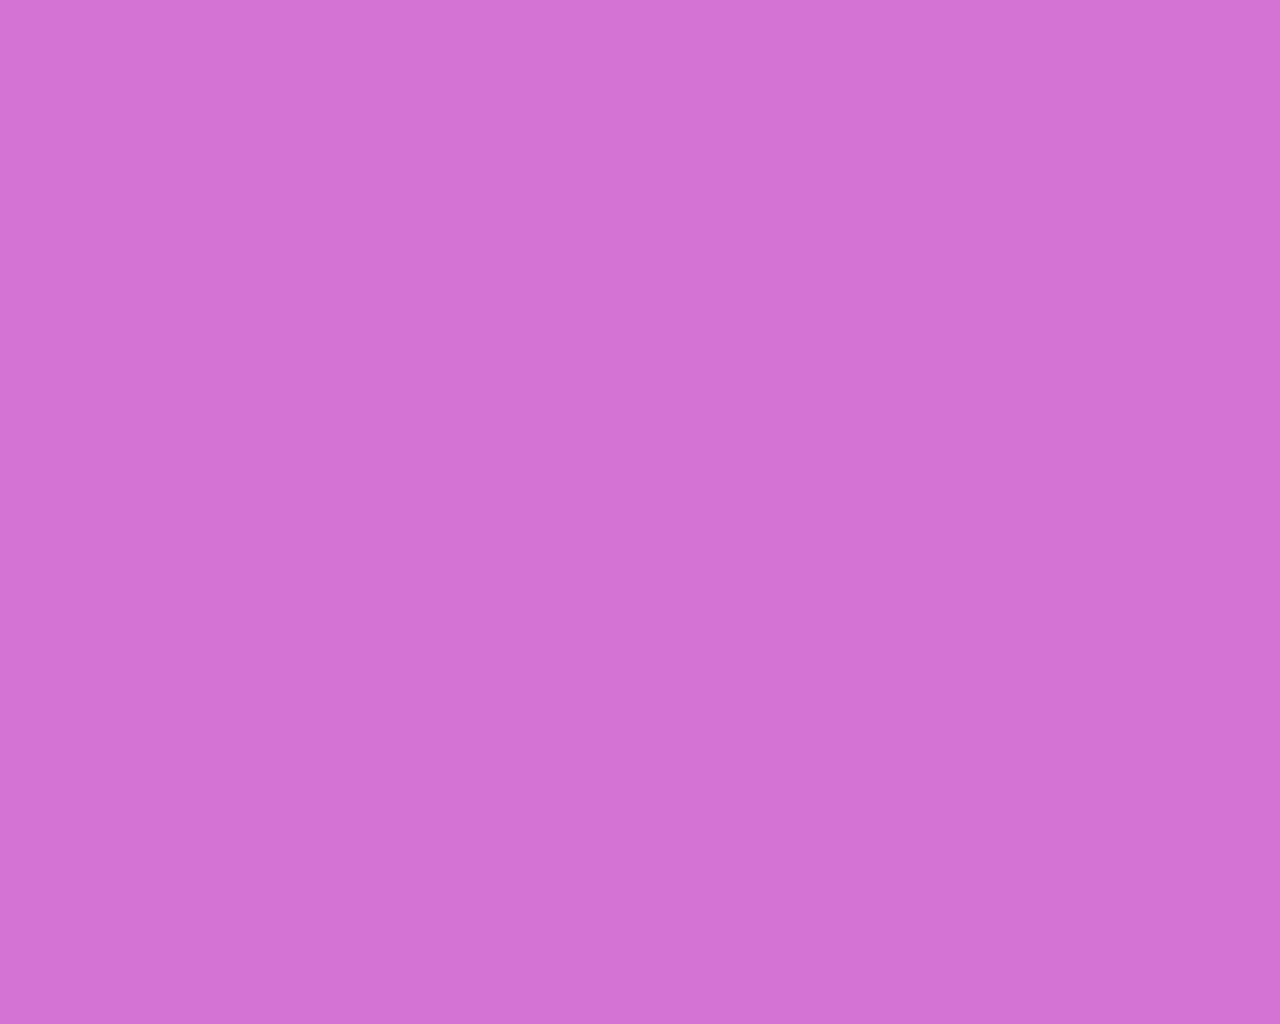 1280x1024 French Mauve Solid Color Background